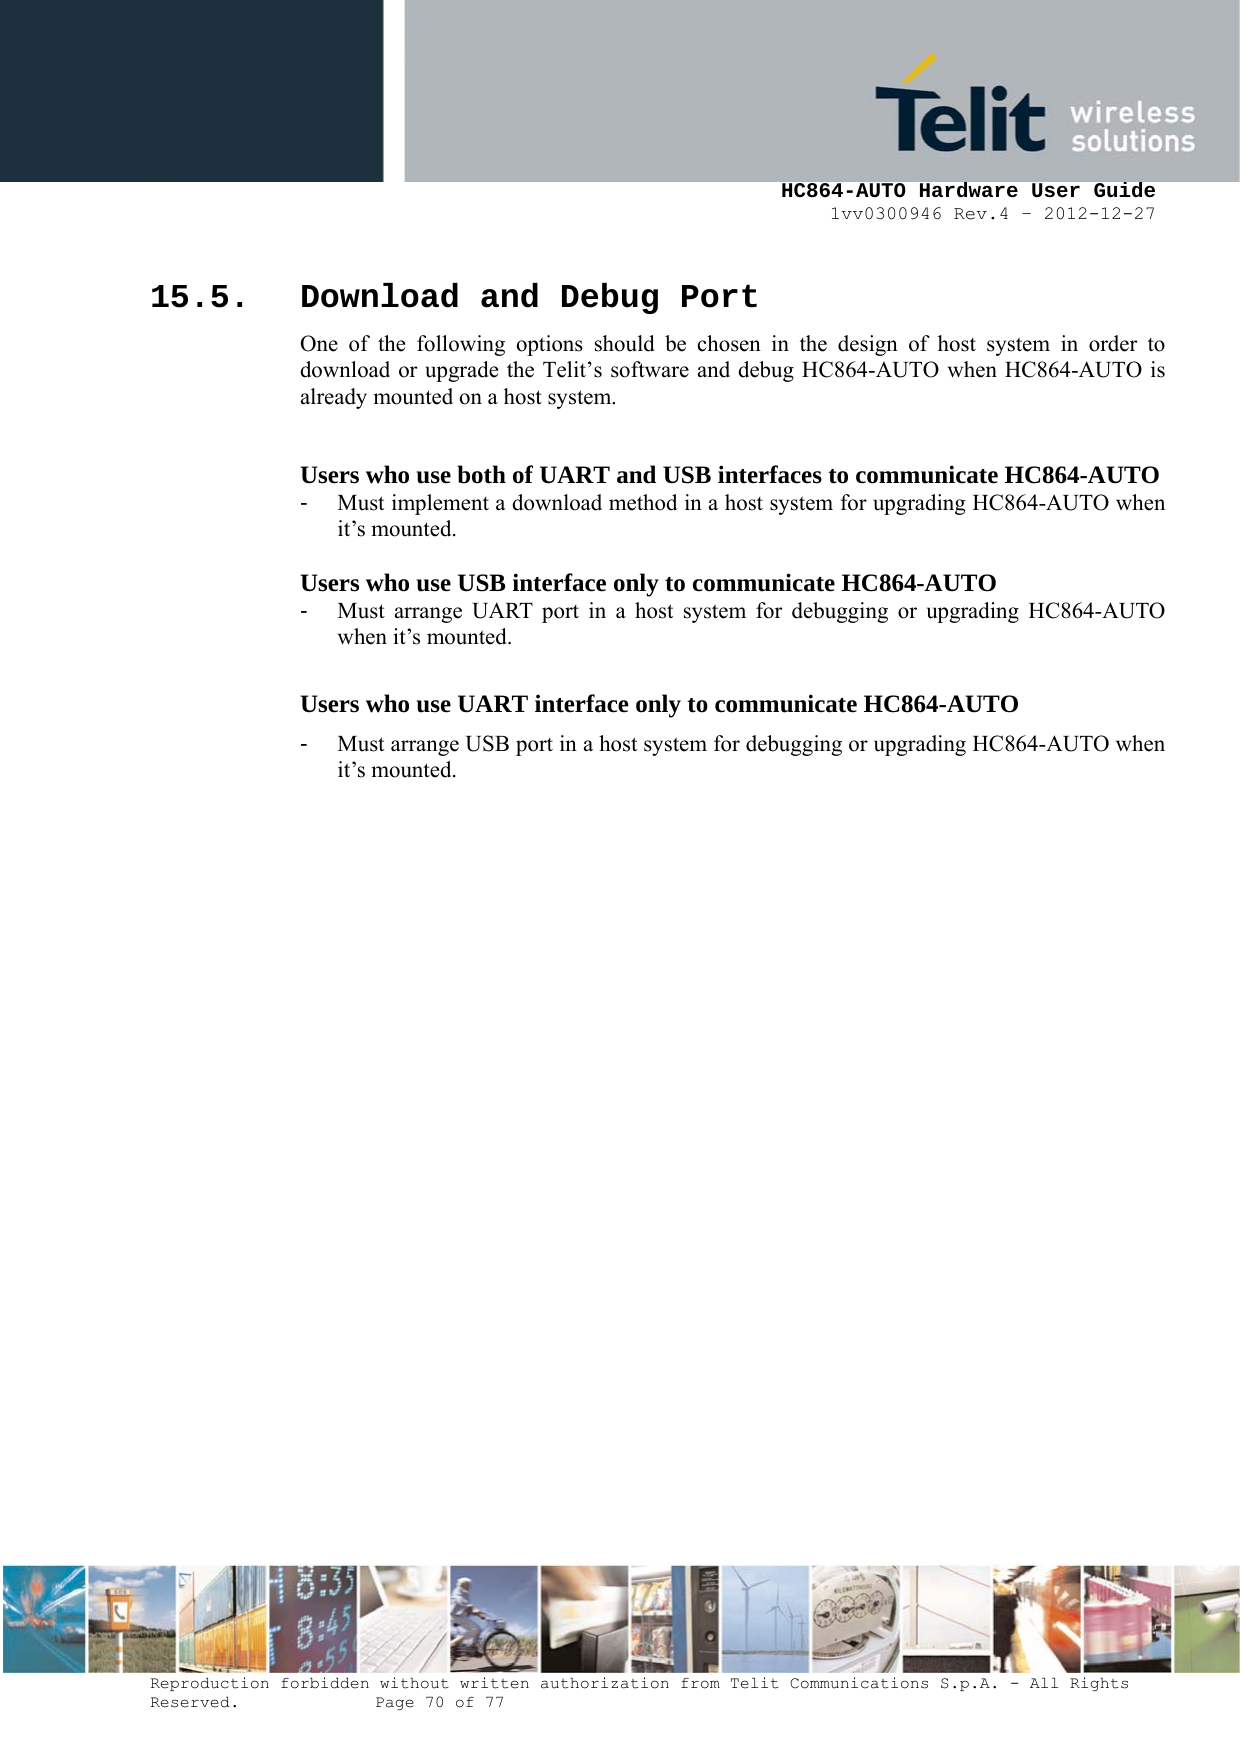     HC864-AUTO Hardware User Guide 1vv0300946 Rev.4 – 2012-12-27 Reproduction forbidden without written authorization from Telit Communications S.p.A. - All Rights Reserved.    Page 70 of 77  15.5. Download and Debug Port One of the following options should be chosen in the design of host system in order to download or upgrade the Telit’s software and debug HC864-AUTO when HC864-AUTO is already mounted on a host system.  Users who use both of UART and USB interfaces to communicate HC864-AUTO -  Must implement a download method in a host system for upgrading HC864-AUTO when it’s mounted.  Users who use USB interface only to communicate HC864-AUTO -  Must arrange UART port in a host system for debugging or upgrading HC864-AUTO when it’s mounted.  Users who use UART interface only to communicate HC864-AUTO -  Must arrange USB port in a host system for debugging or upgrading HC864-AUTO when it’s mounted.   